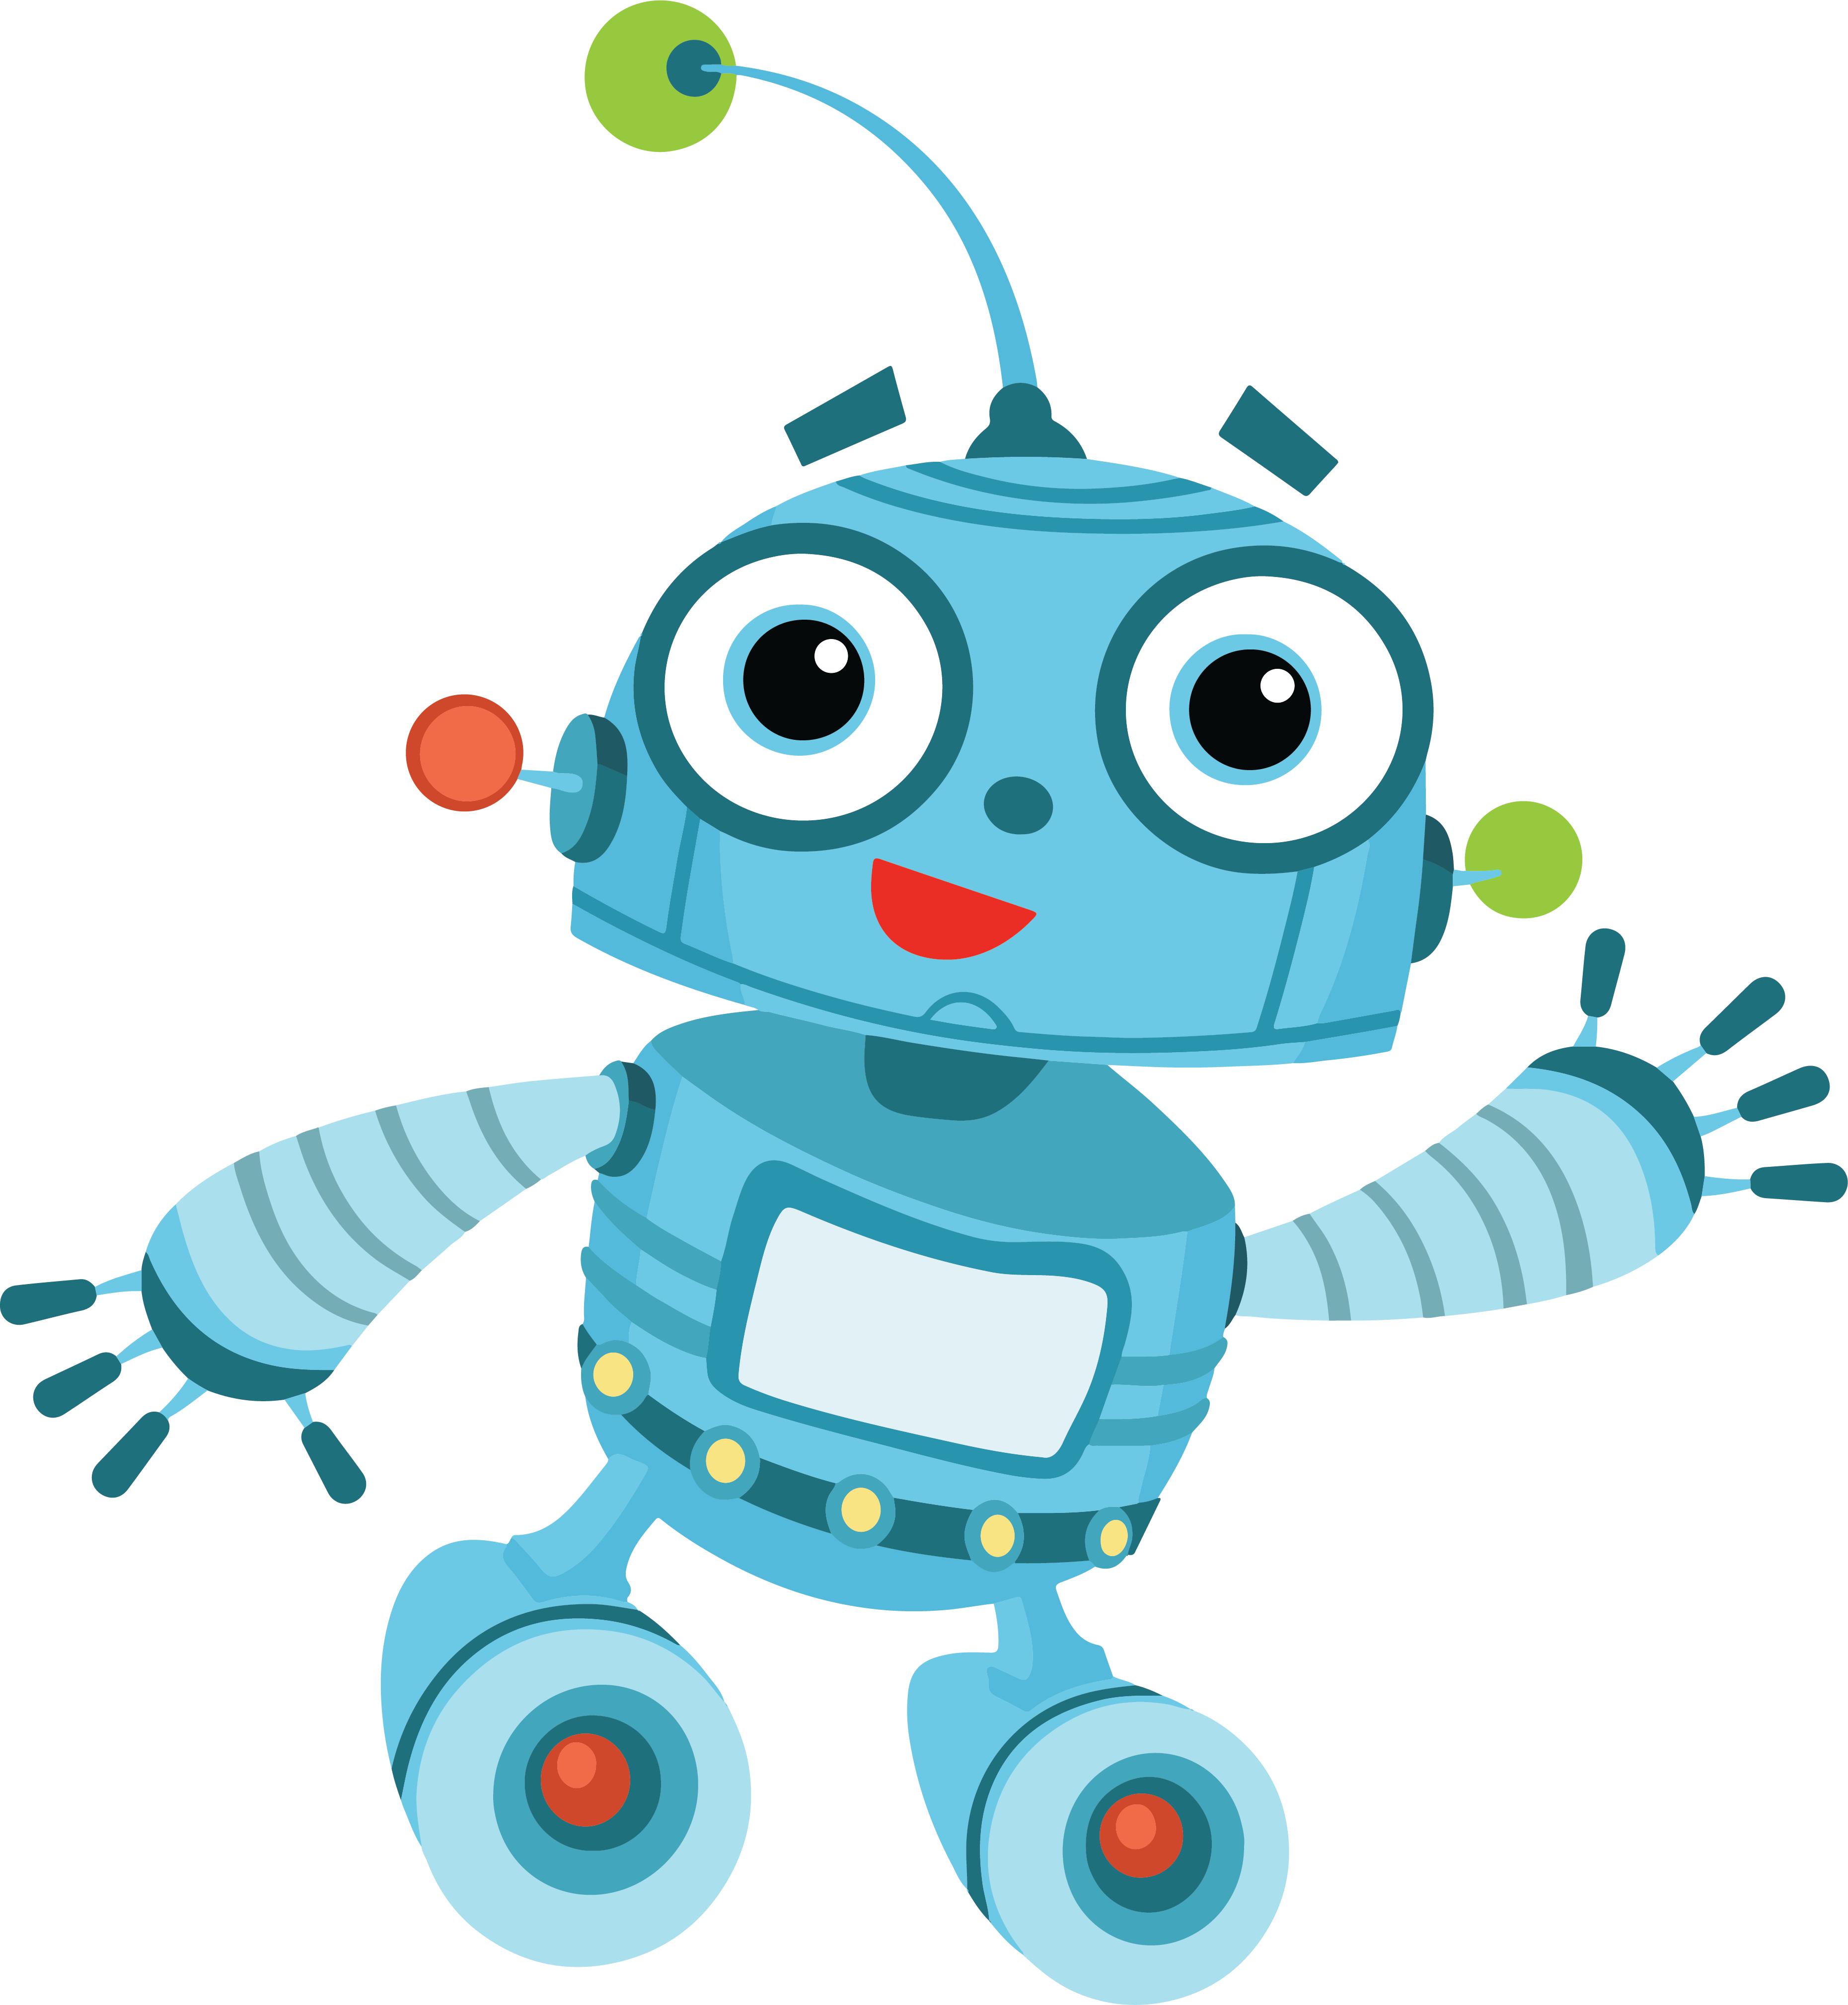 Artwork of Booster, the mascot of Imagine Language and Literacy.